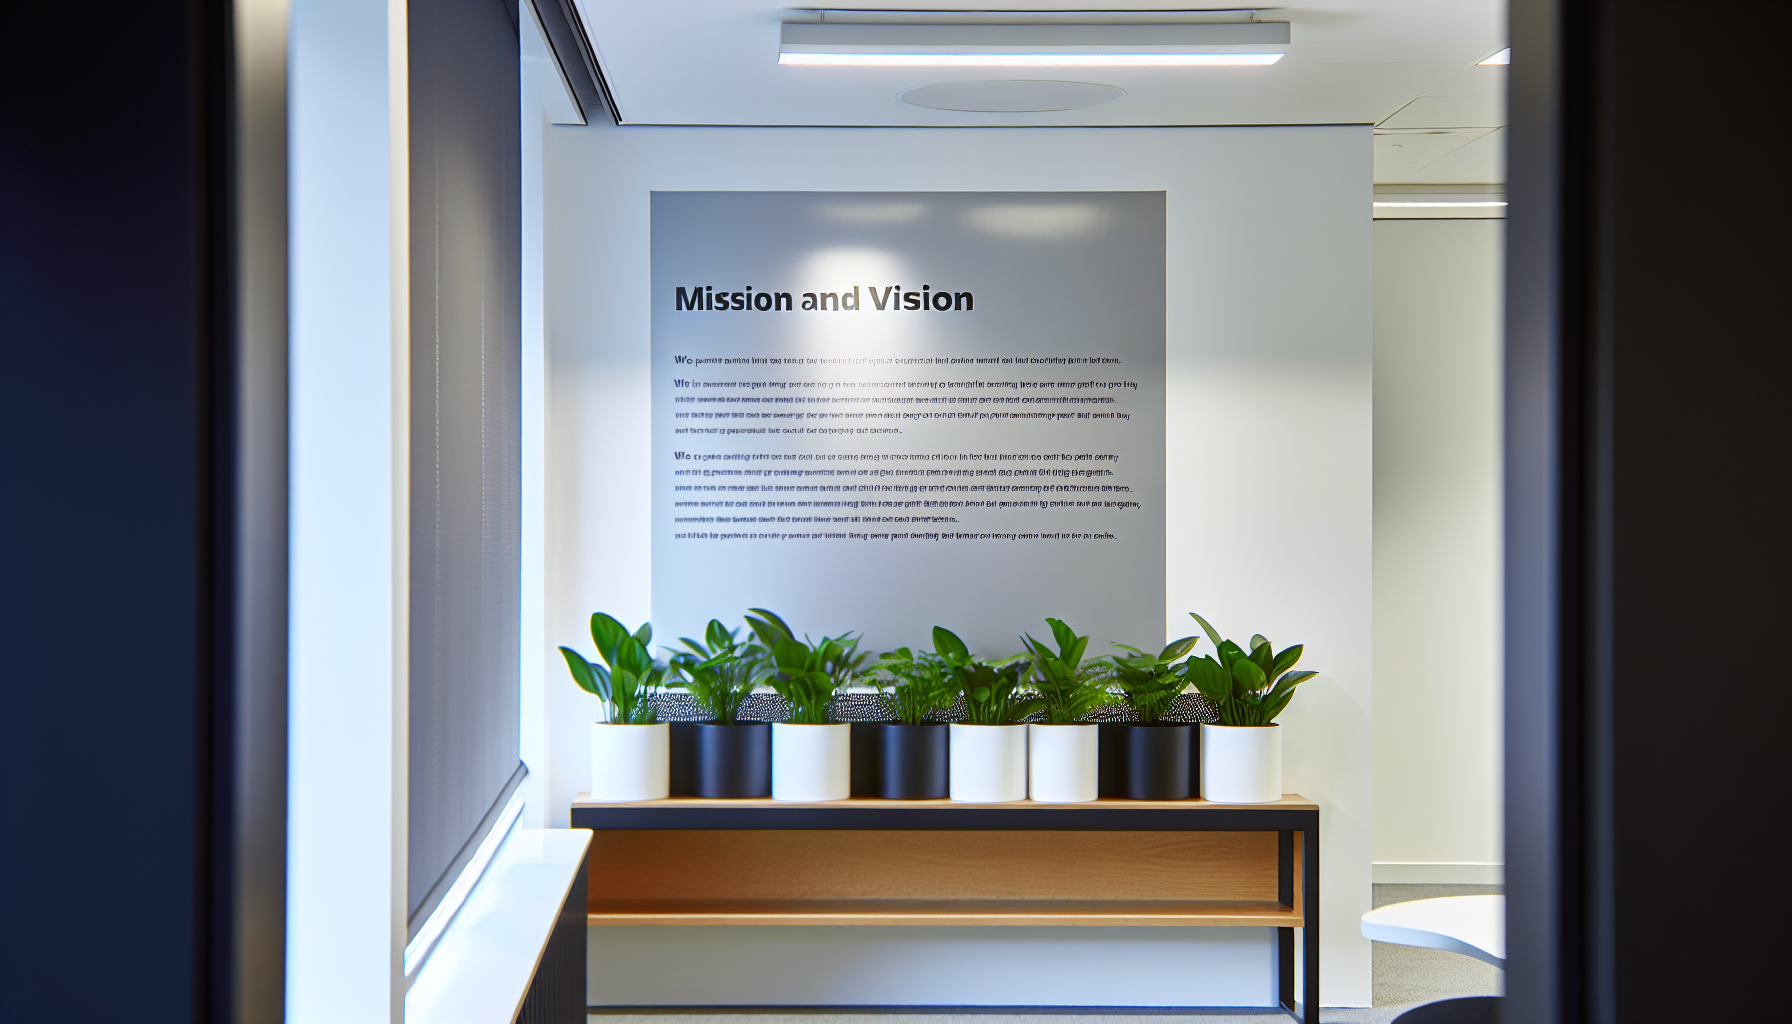 An image of a company's mission and vision statement displayed on a wall, illustrating the importance of articulating these values in the employee handbook.